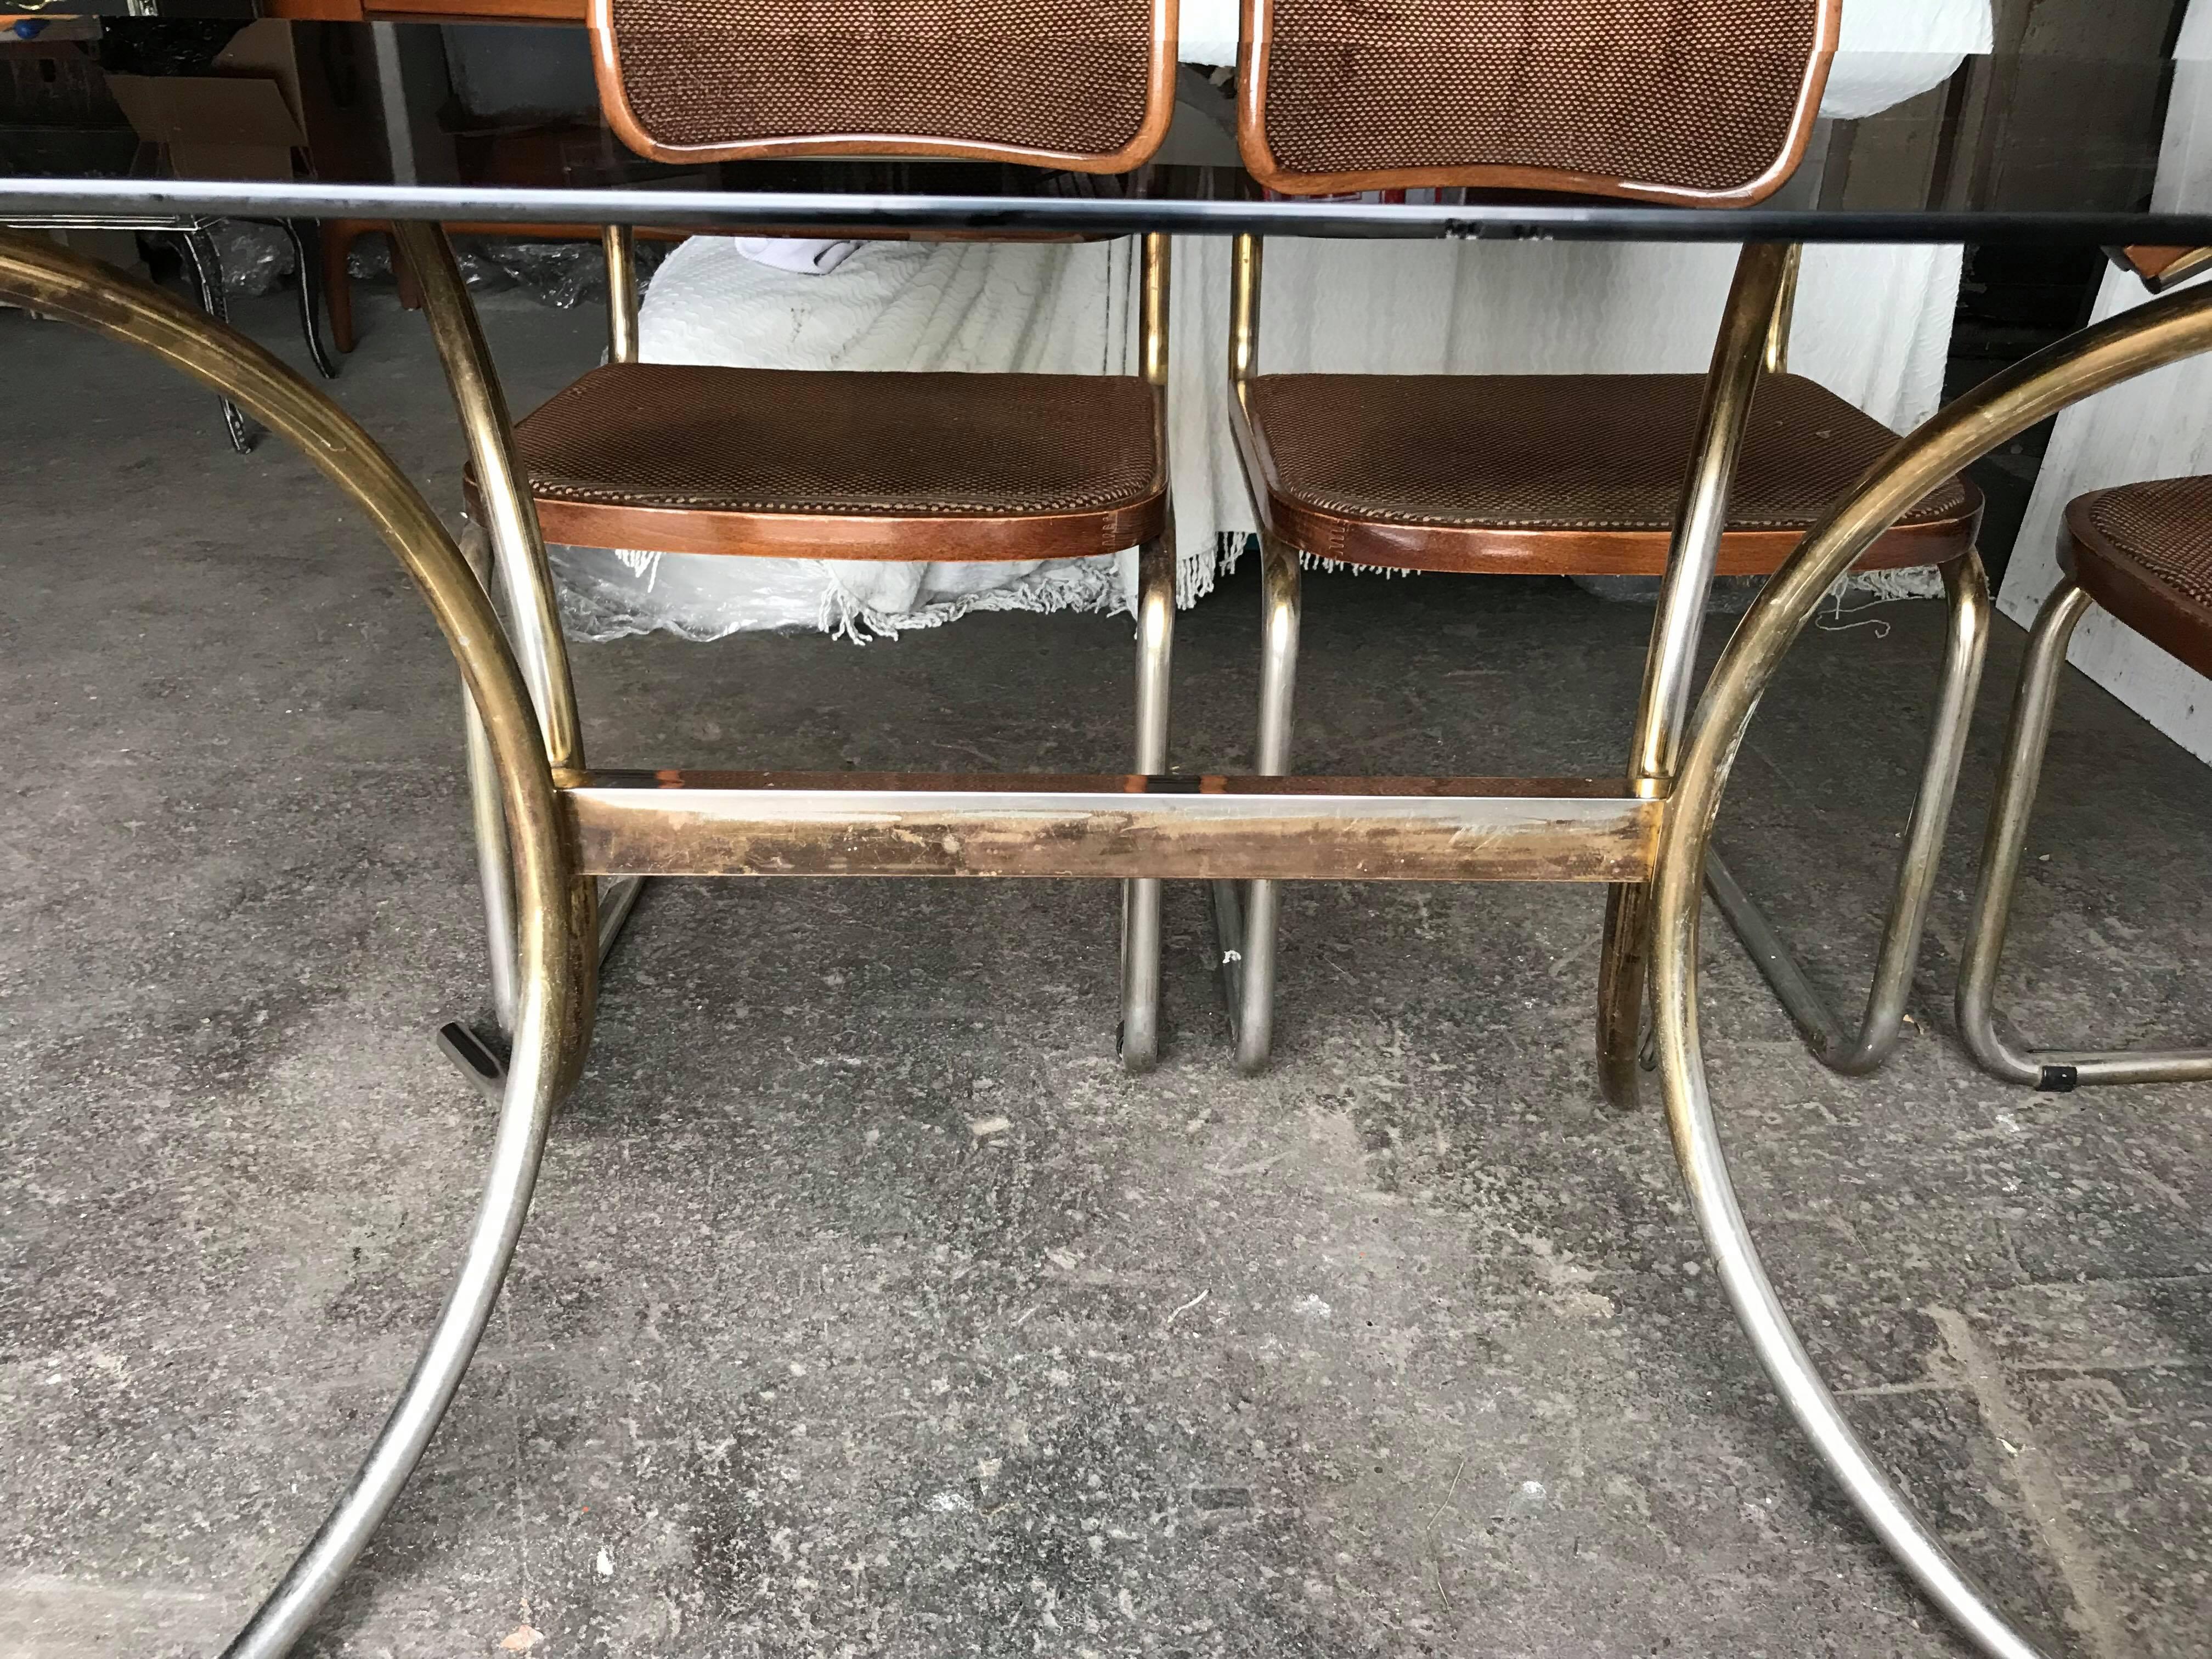 Bauhaus conference or dining set

Smoked glass table with brass pedestal base.
A set of 6 original Marcel Breuer Cesca style dining chairs from the 1980s. Upholstered in a soft brown checked fabric, these gold chromed cantilever chairs are super